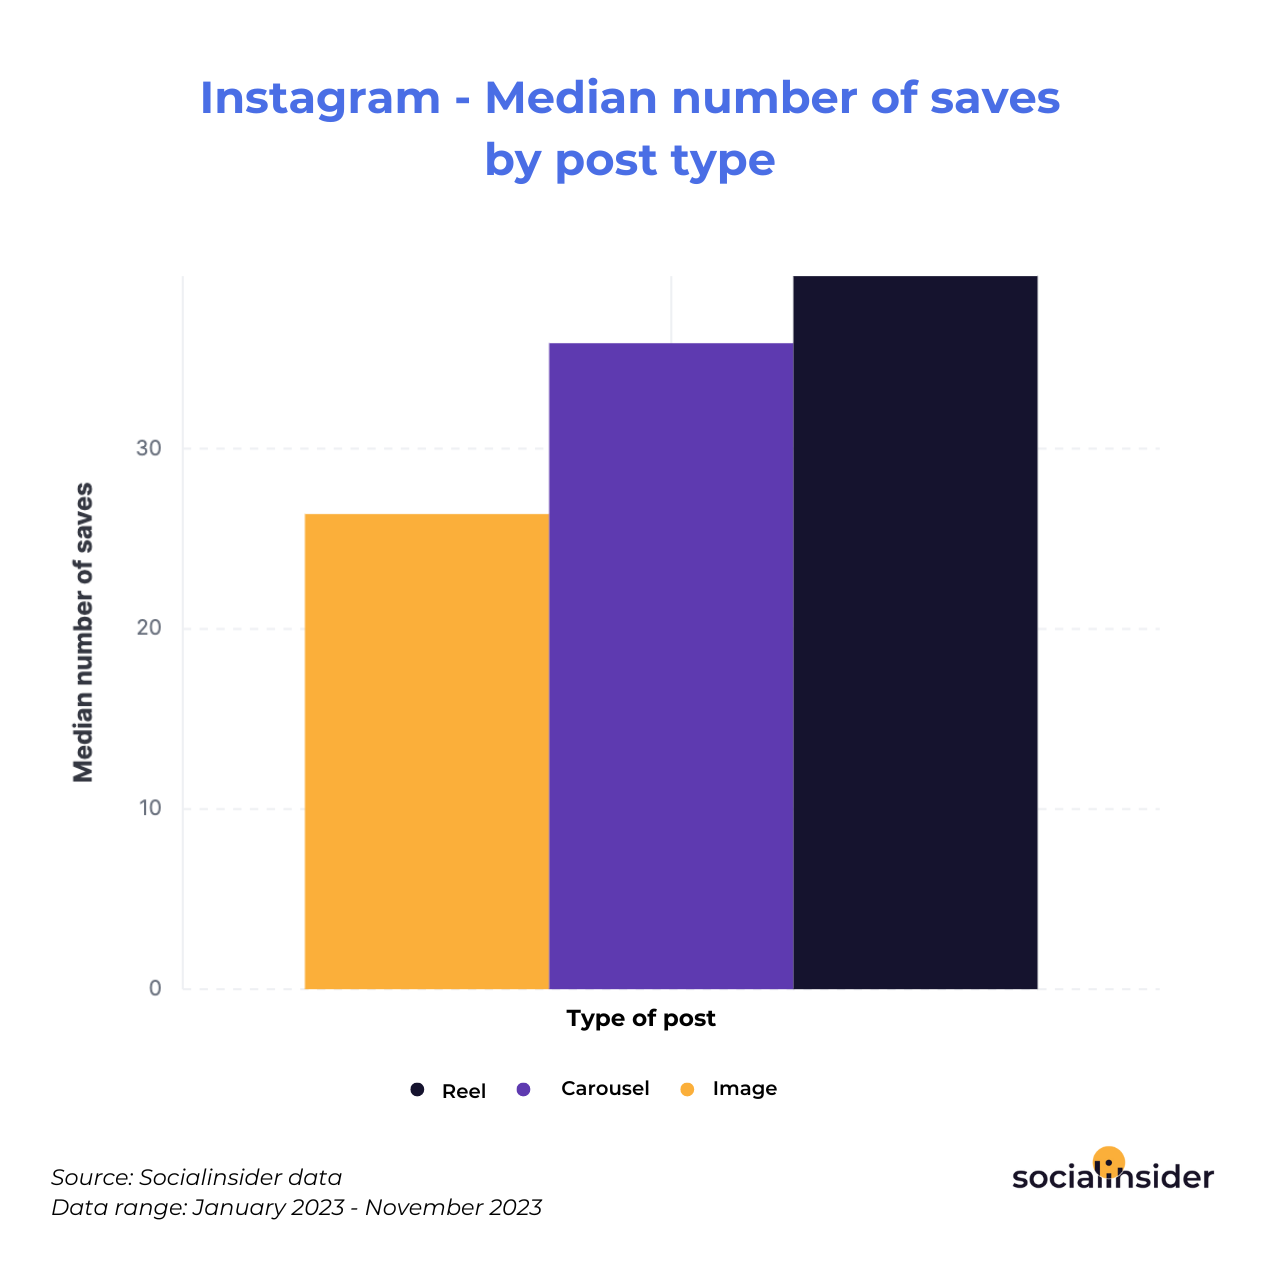 Instagram - Median number of saves by post type